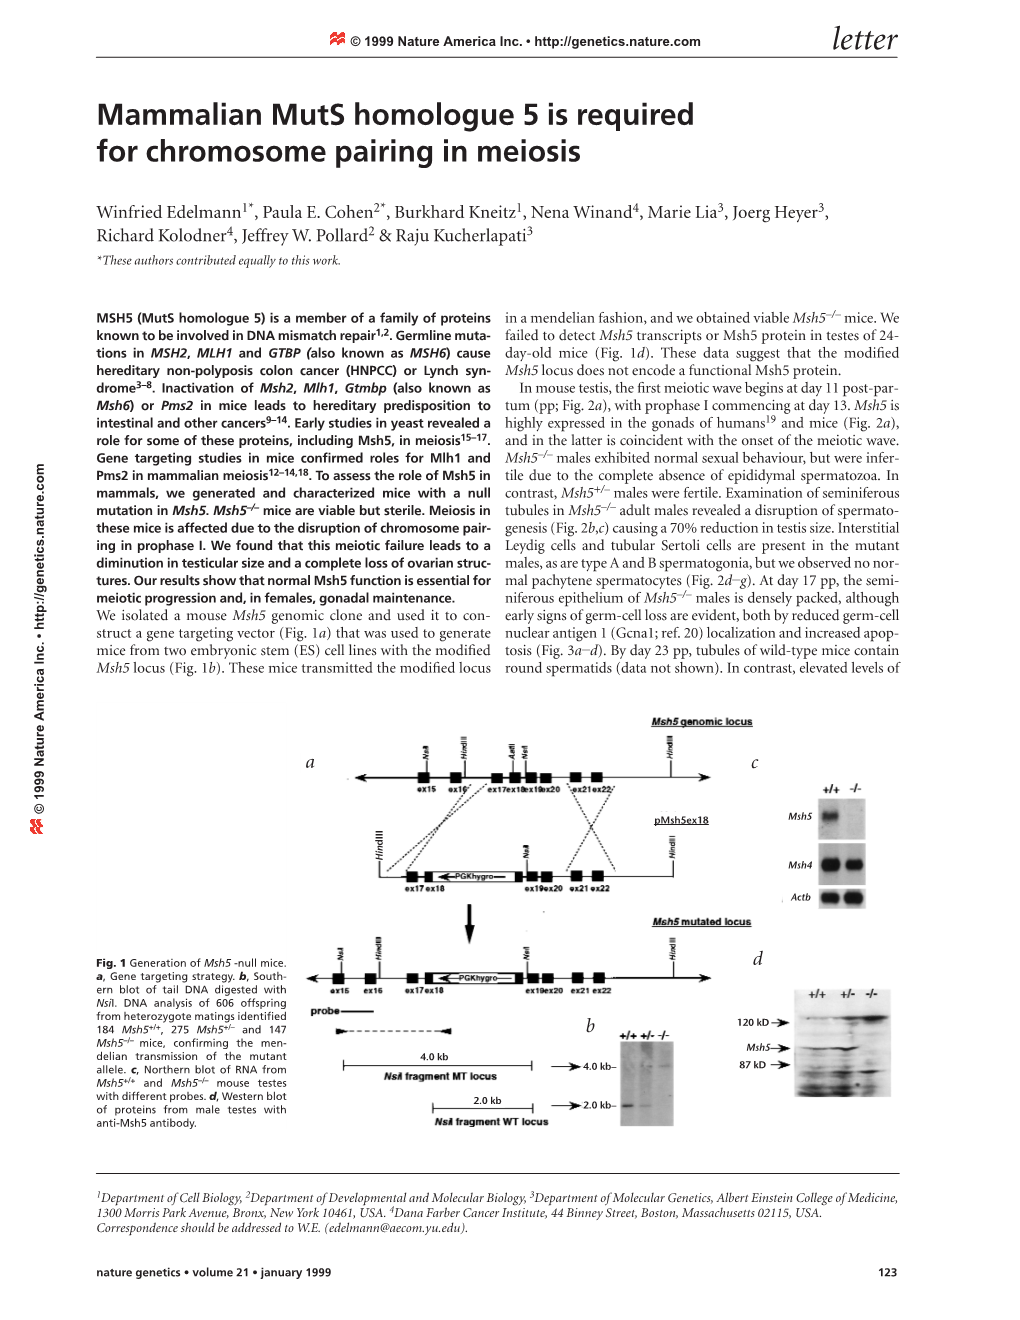 Mammalian Muts Homologue 5 Is Required for Chromosome Pairing in Meiosis